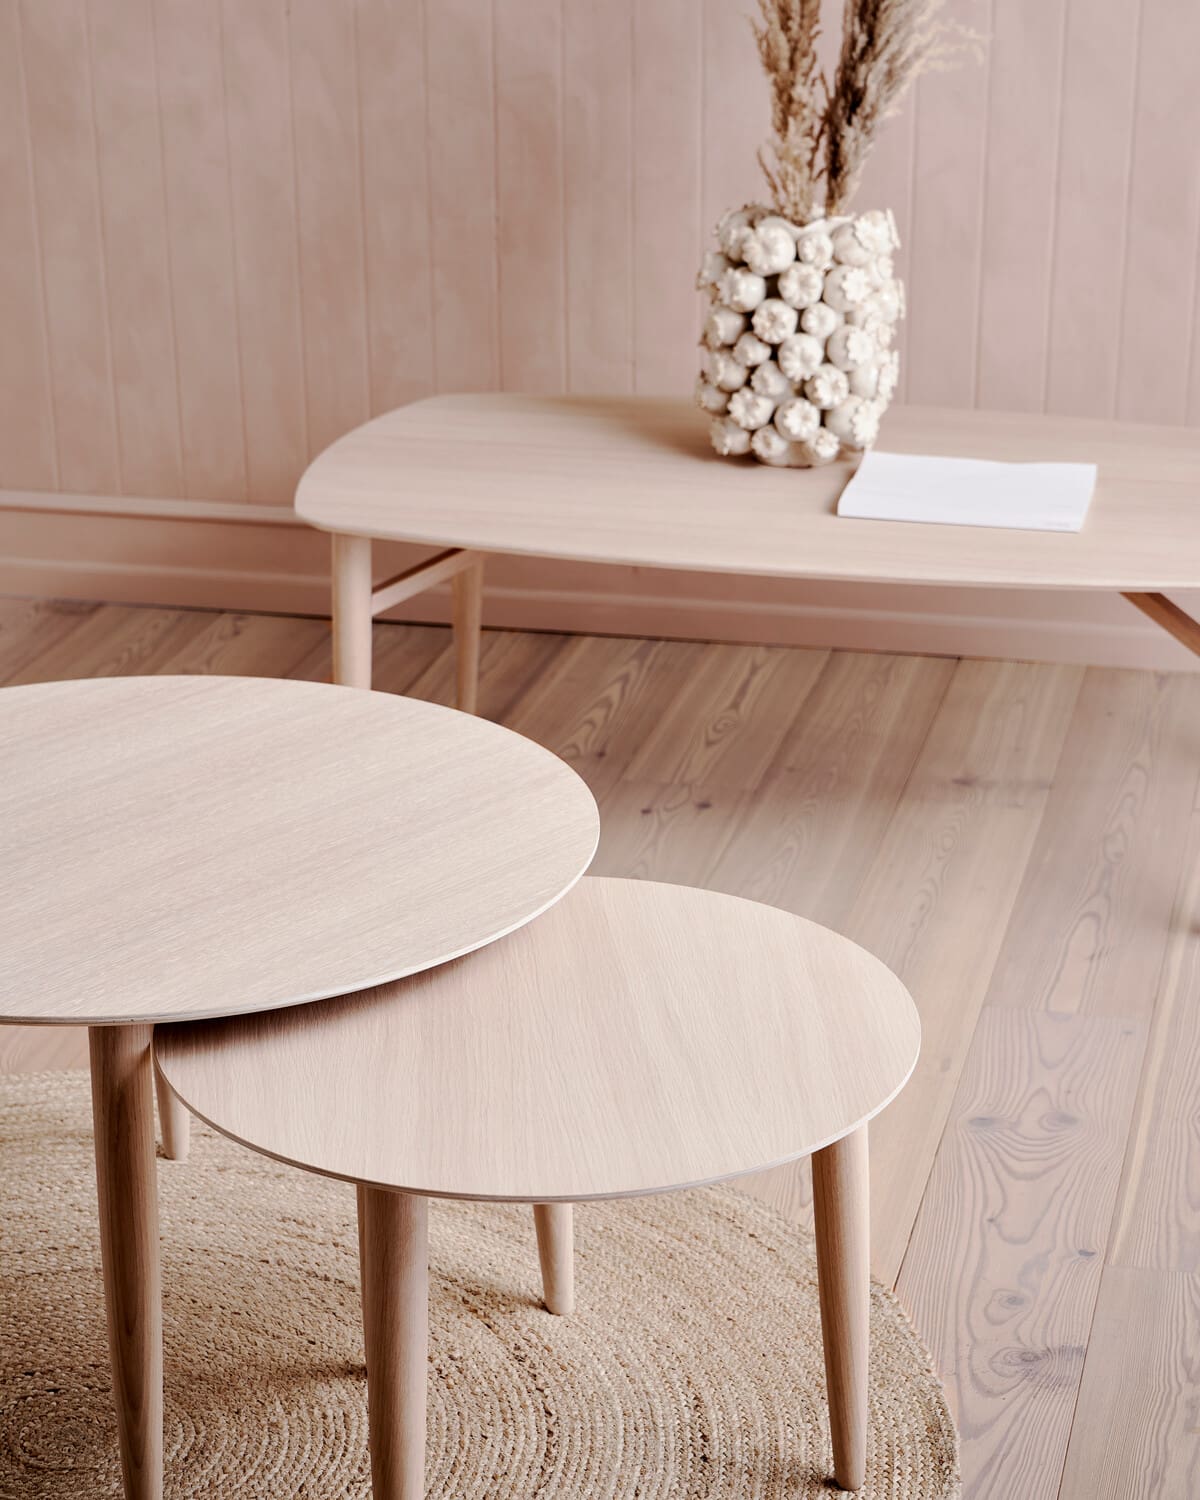 Lyse sofaborde from Thomsen furniture